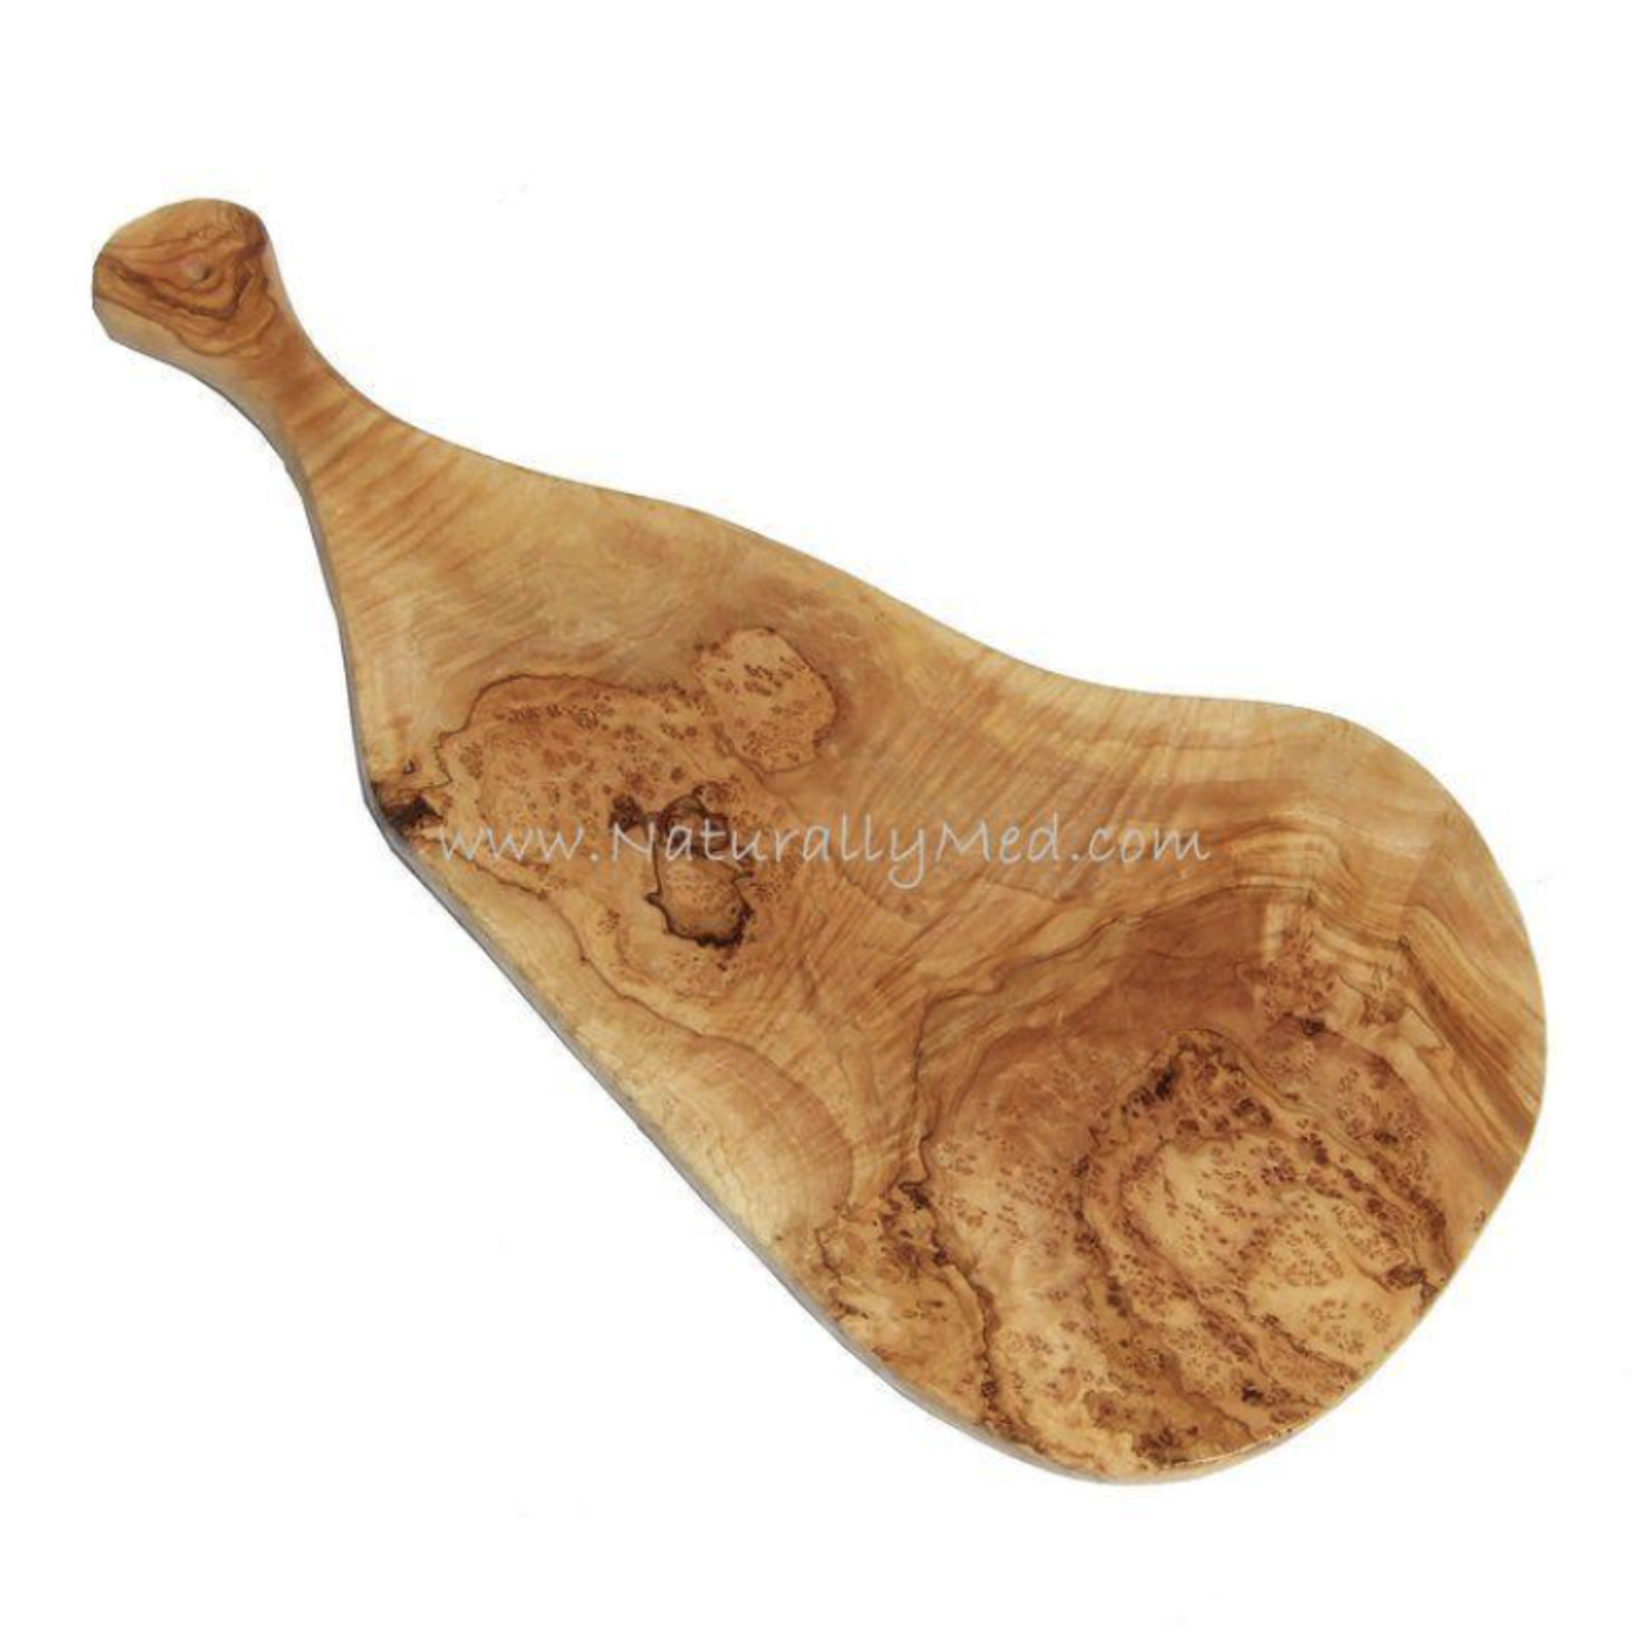 Naturally Med Olive Wood Cut/Serving Board W/ Handle - 13.5"